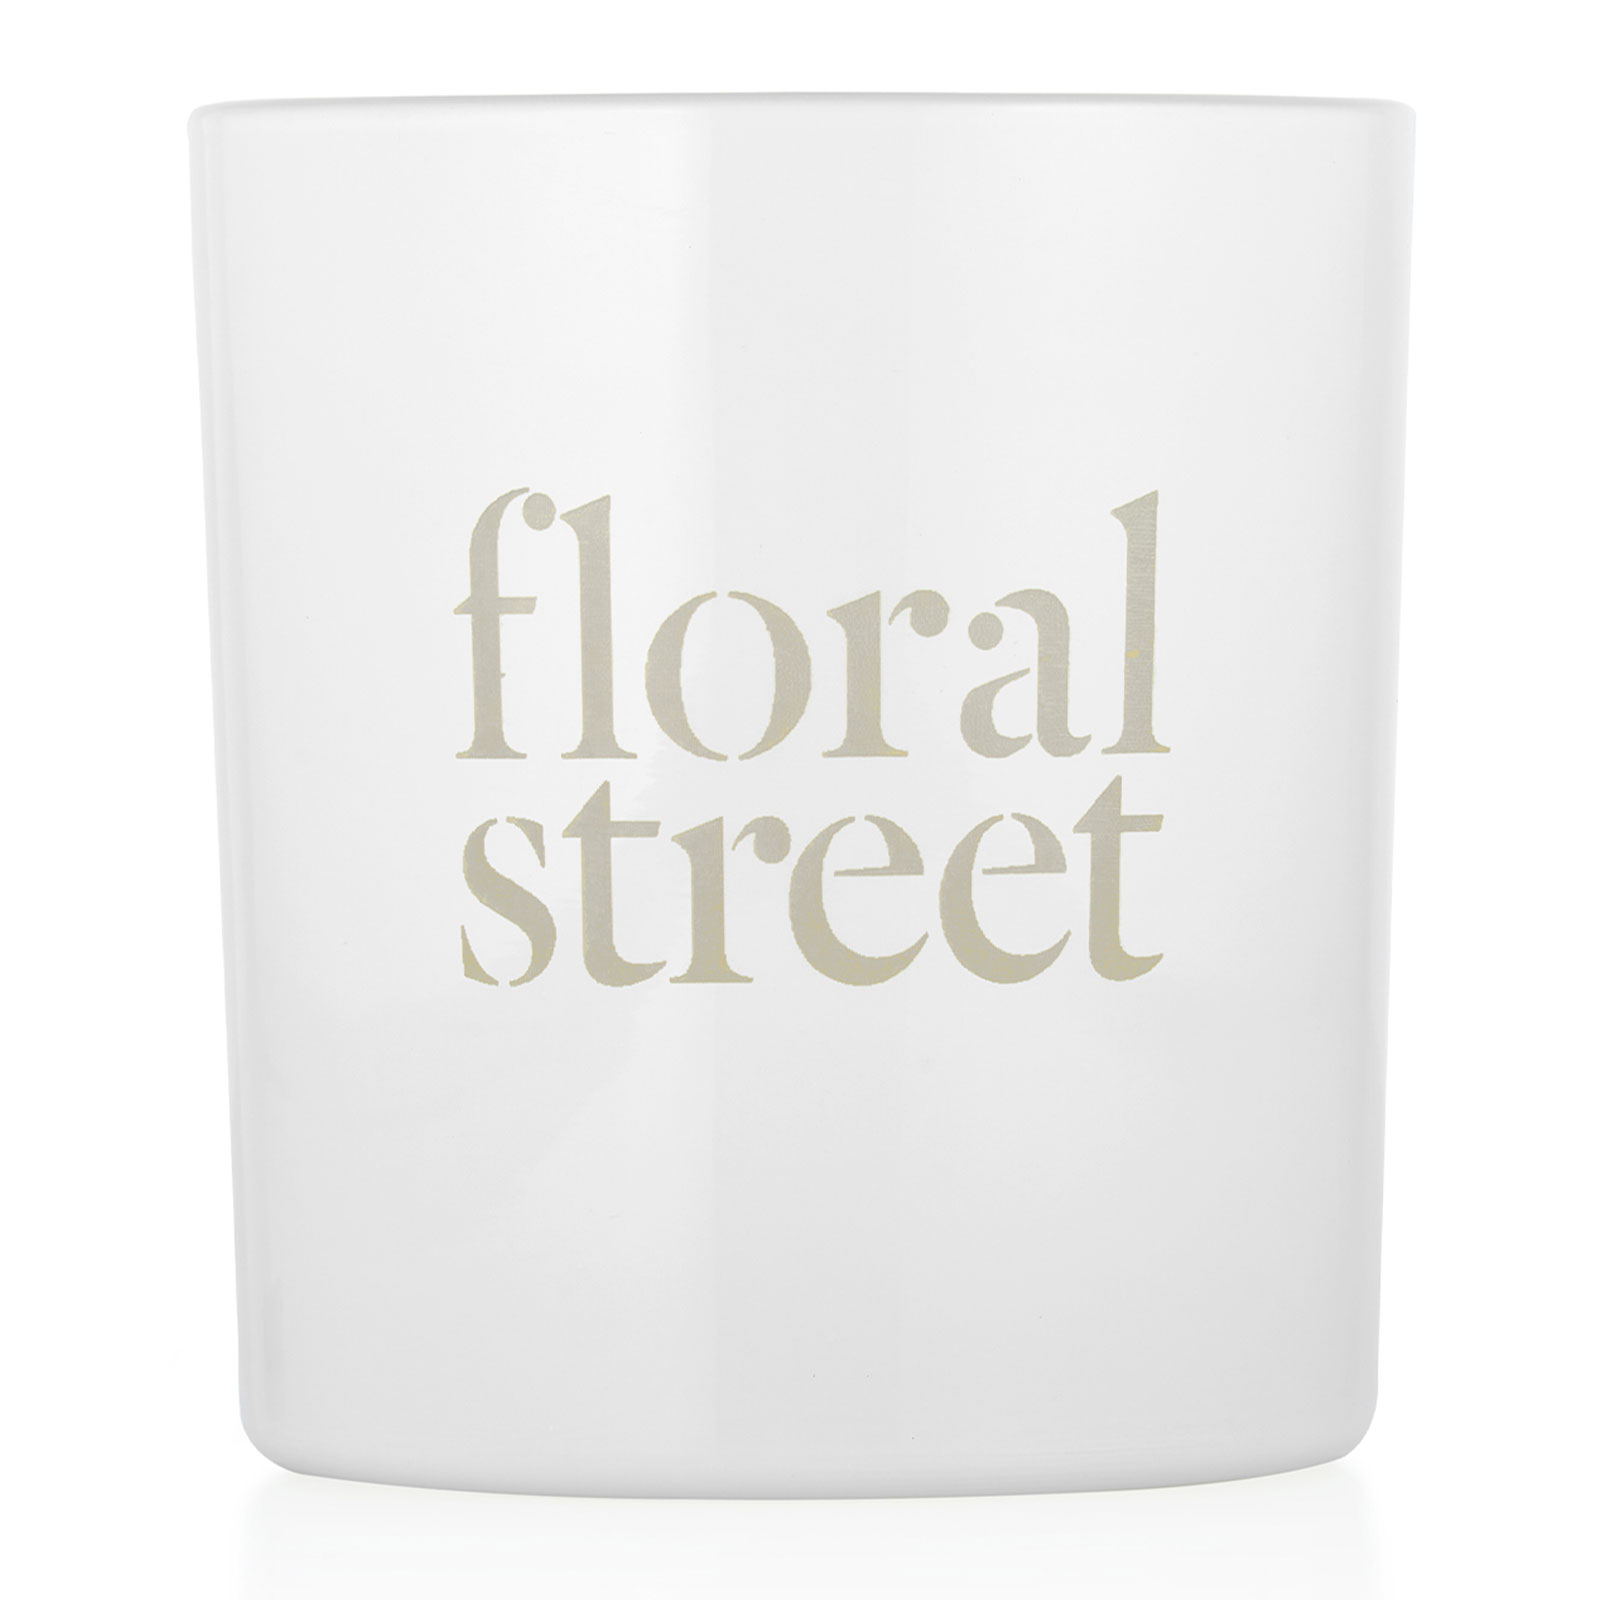 Floral Street Covent Garden Tuberose Candle 200G